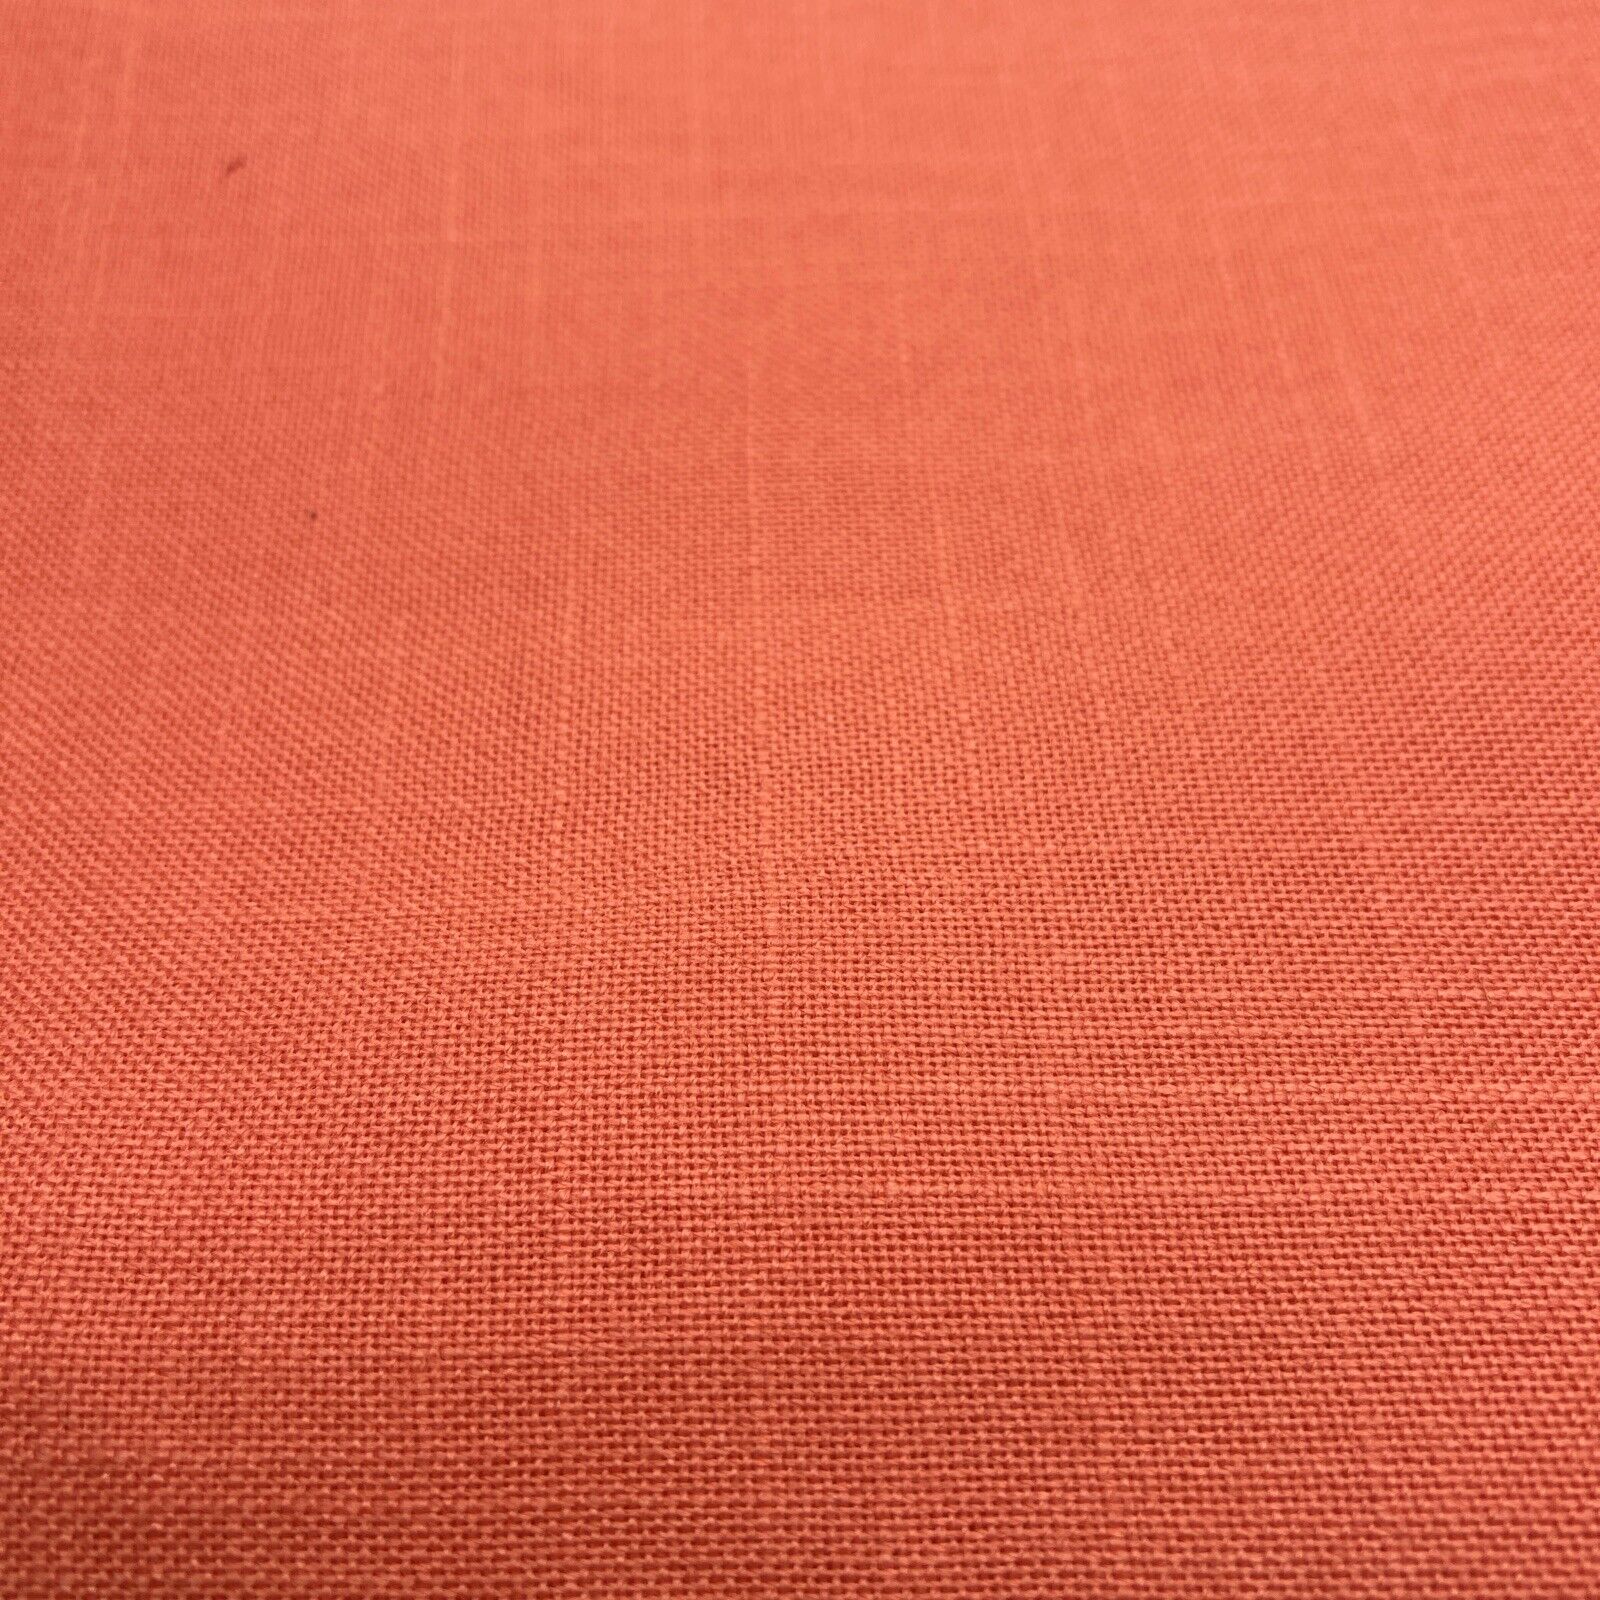 Vintage Solid Coral Orange Linen Fabric Material 4 Yards 60”